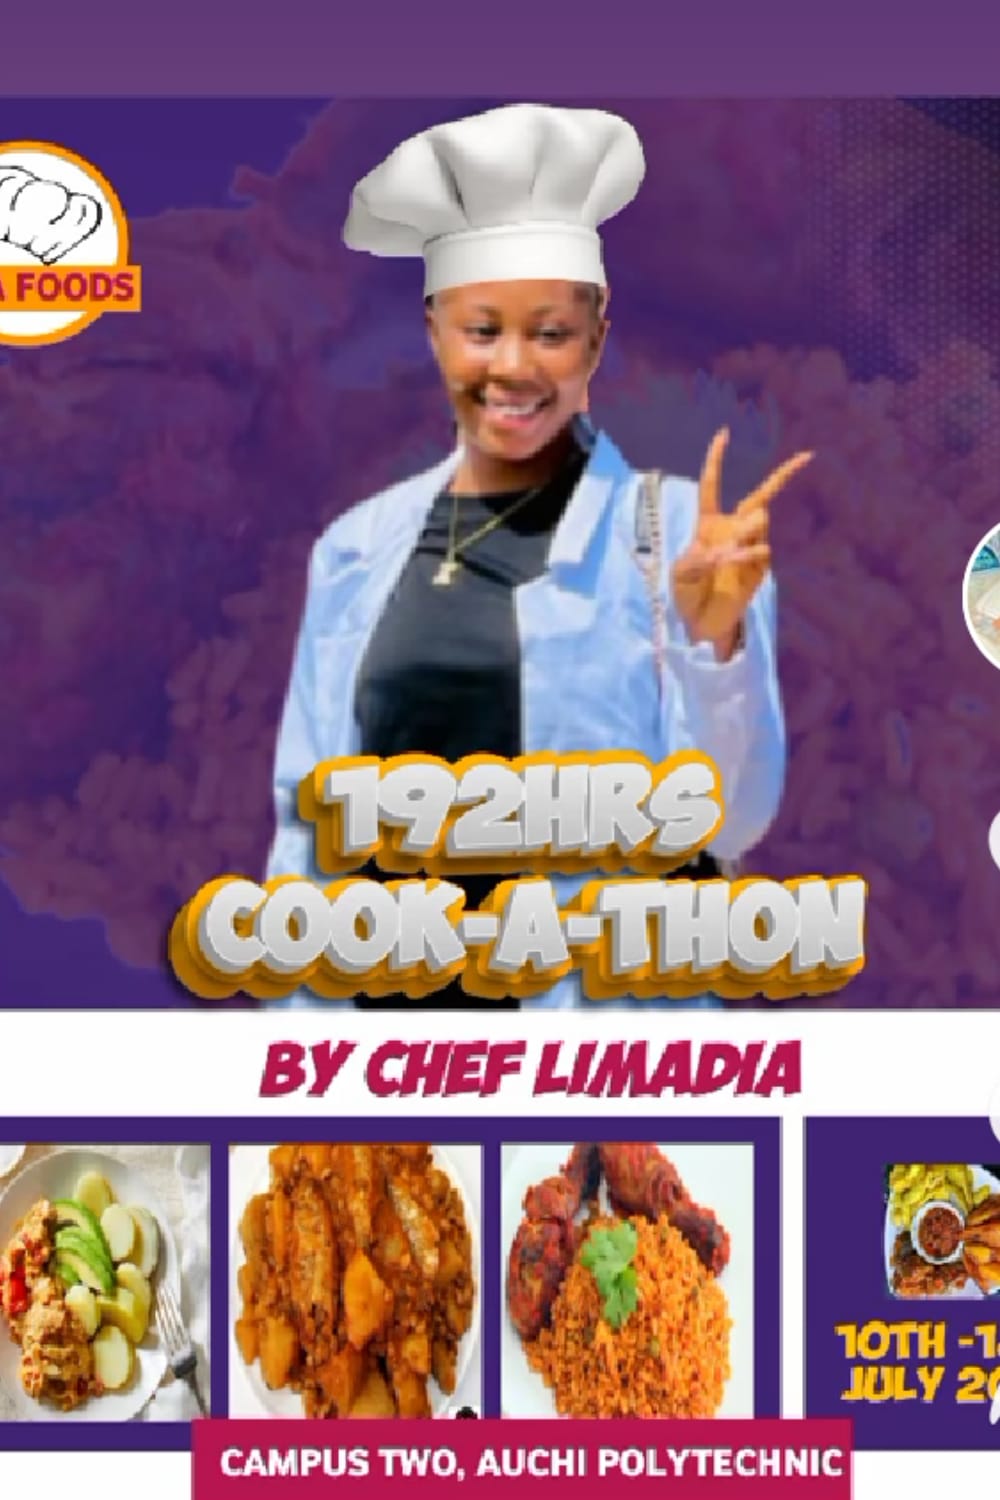 Another Nigerian chef, Limadia from Kogi, set to begin 192-hour cook-a-thon (Video)